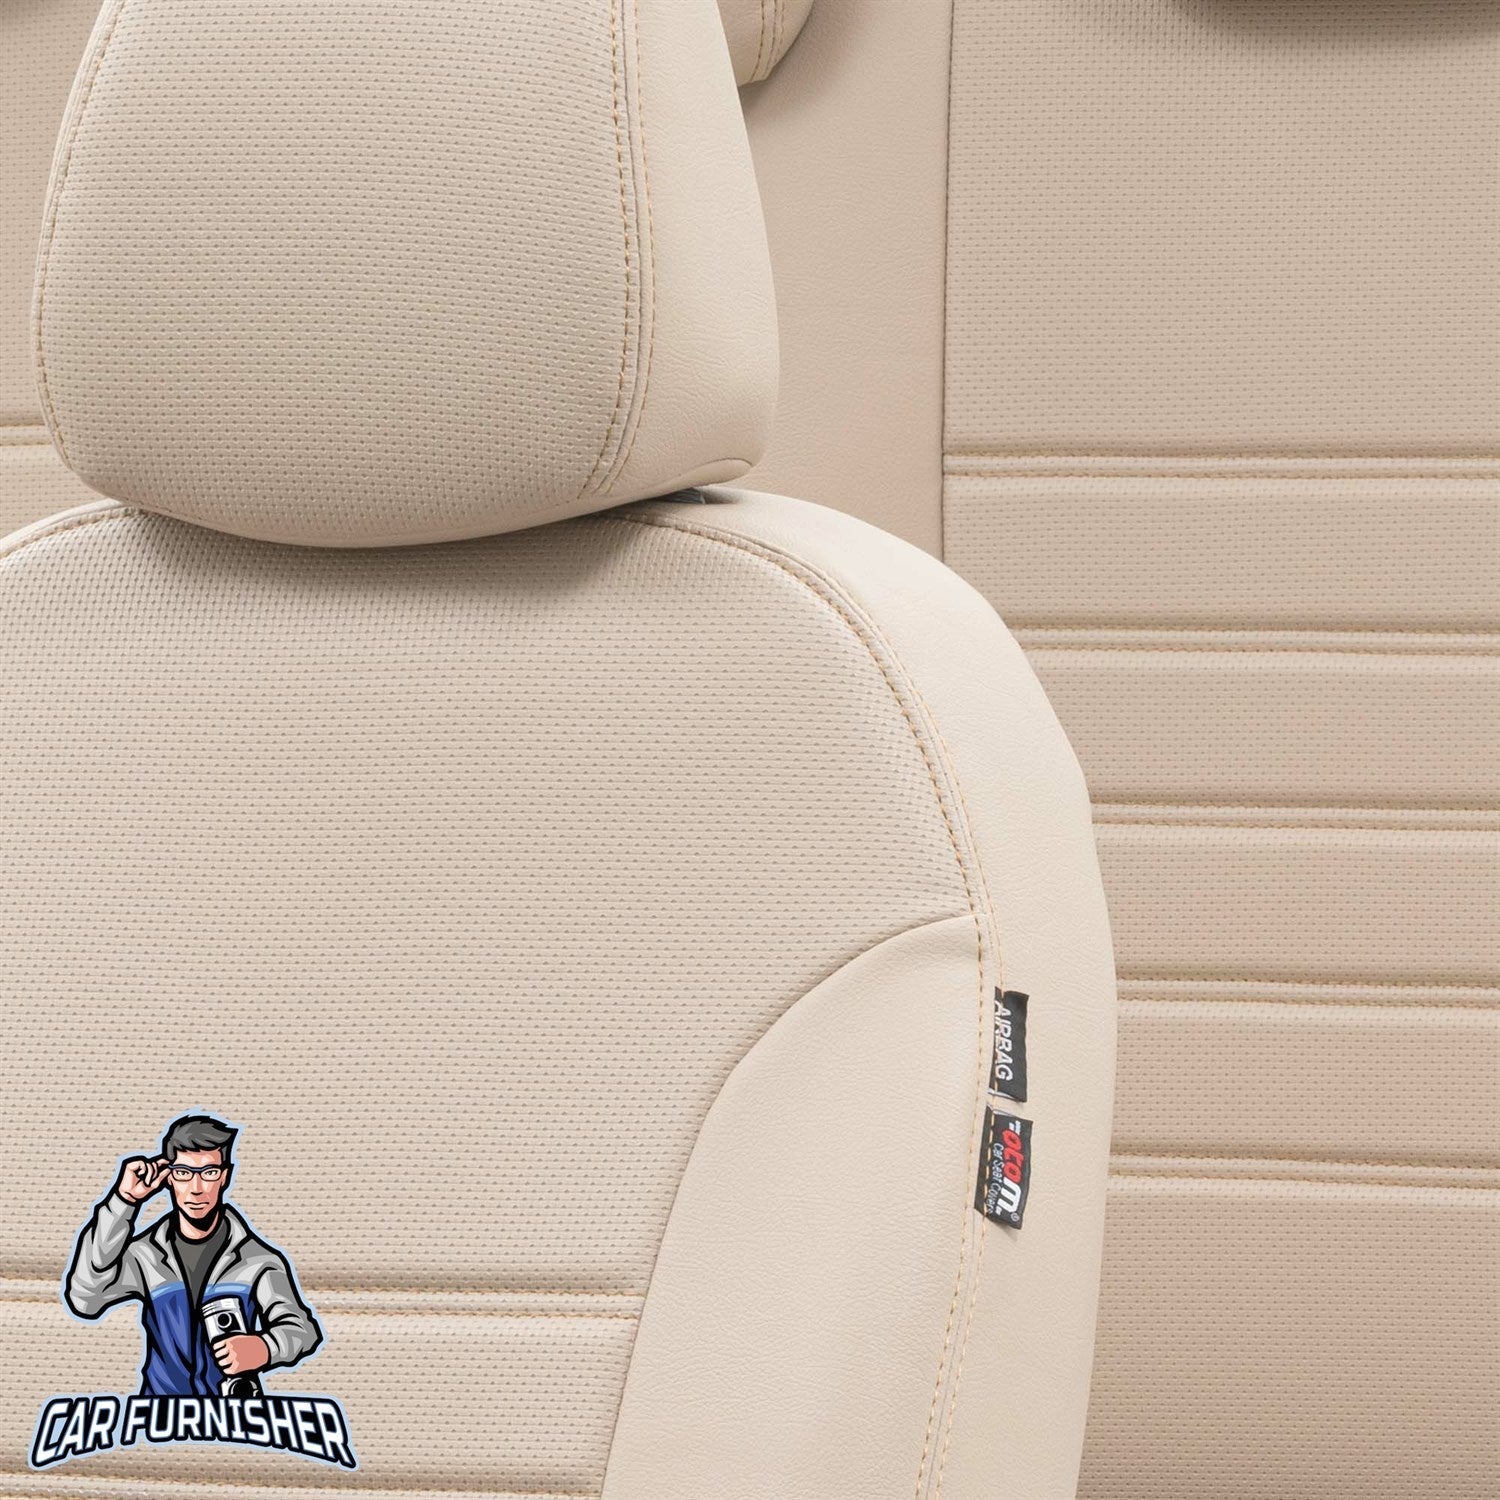 Fiat 500 Seat Covers New York Leather Design Beige Leather